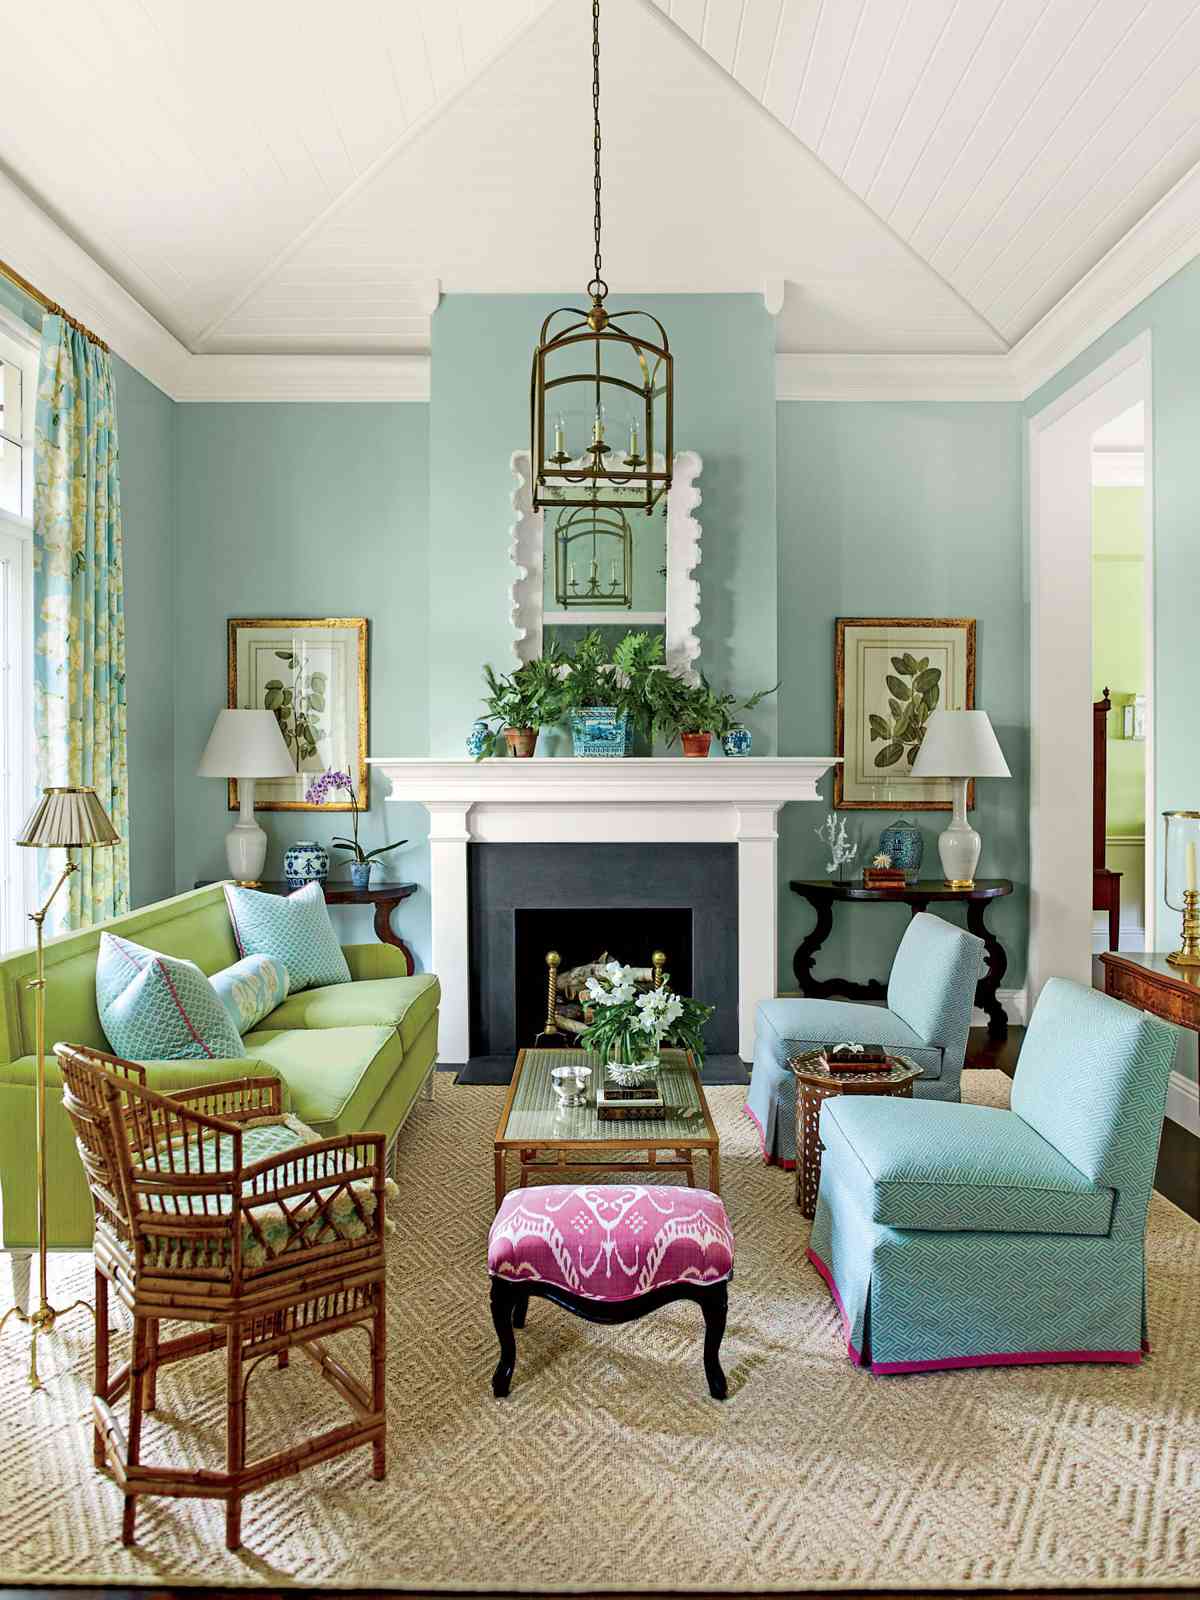 No. 1 Pull Out a Bold Accent Color